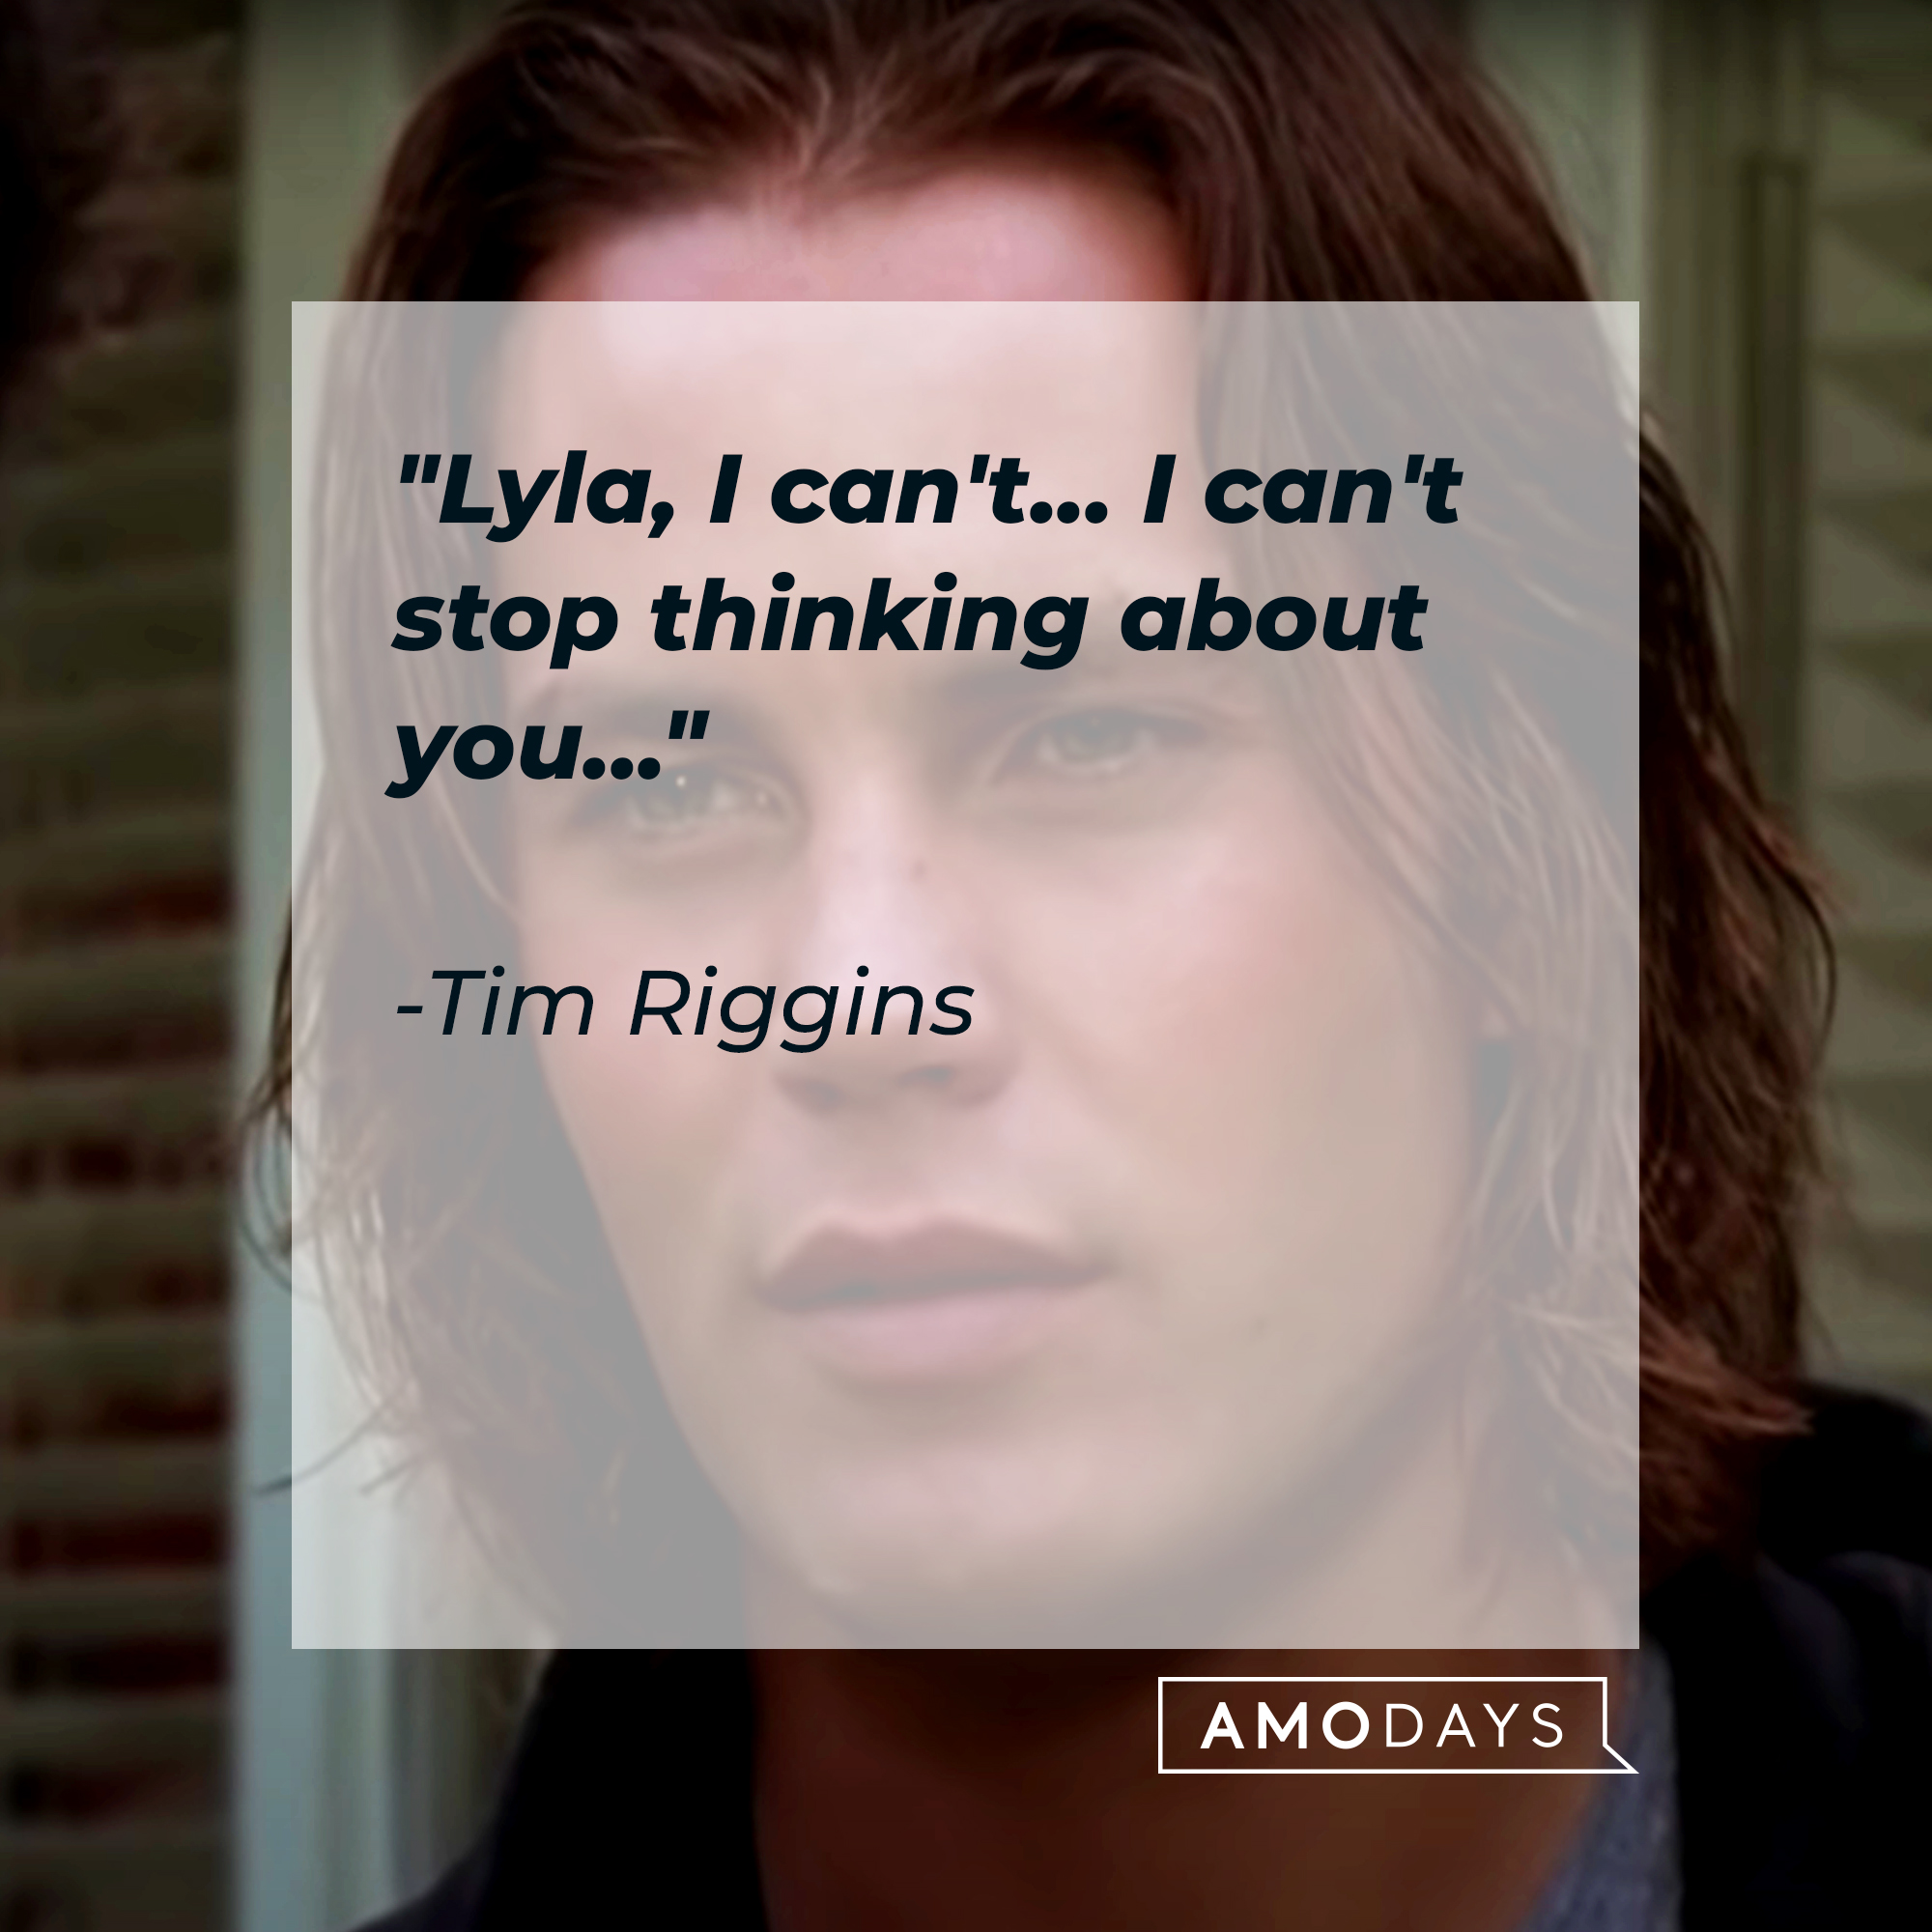 Tim Riggins' quote, "Lyla, I can't... I can't stop thinking about you..." | Source: Facebook/fridaynightlights